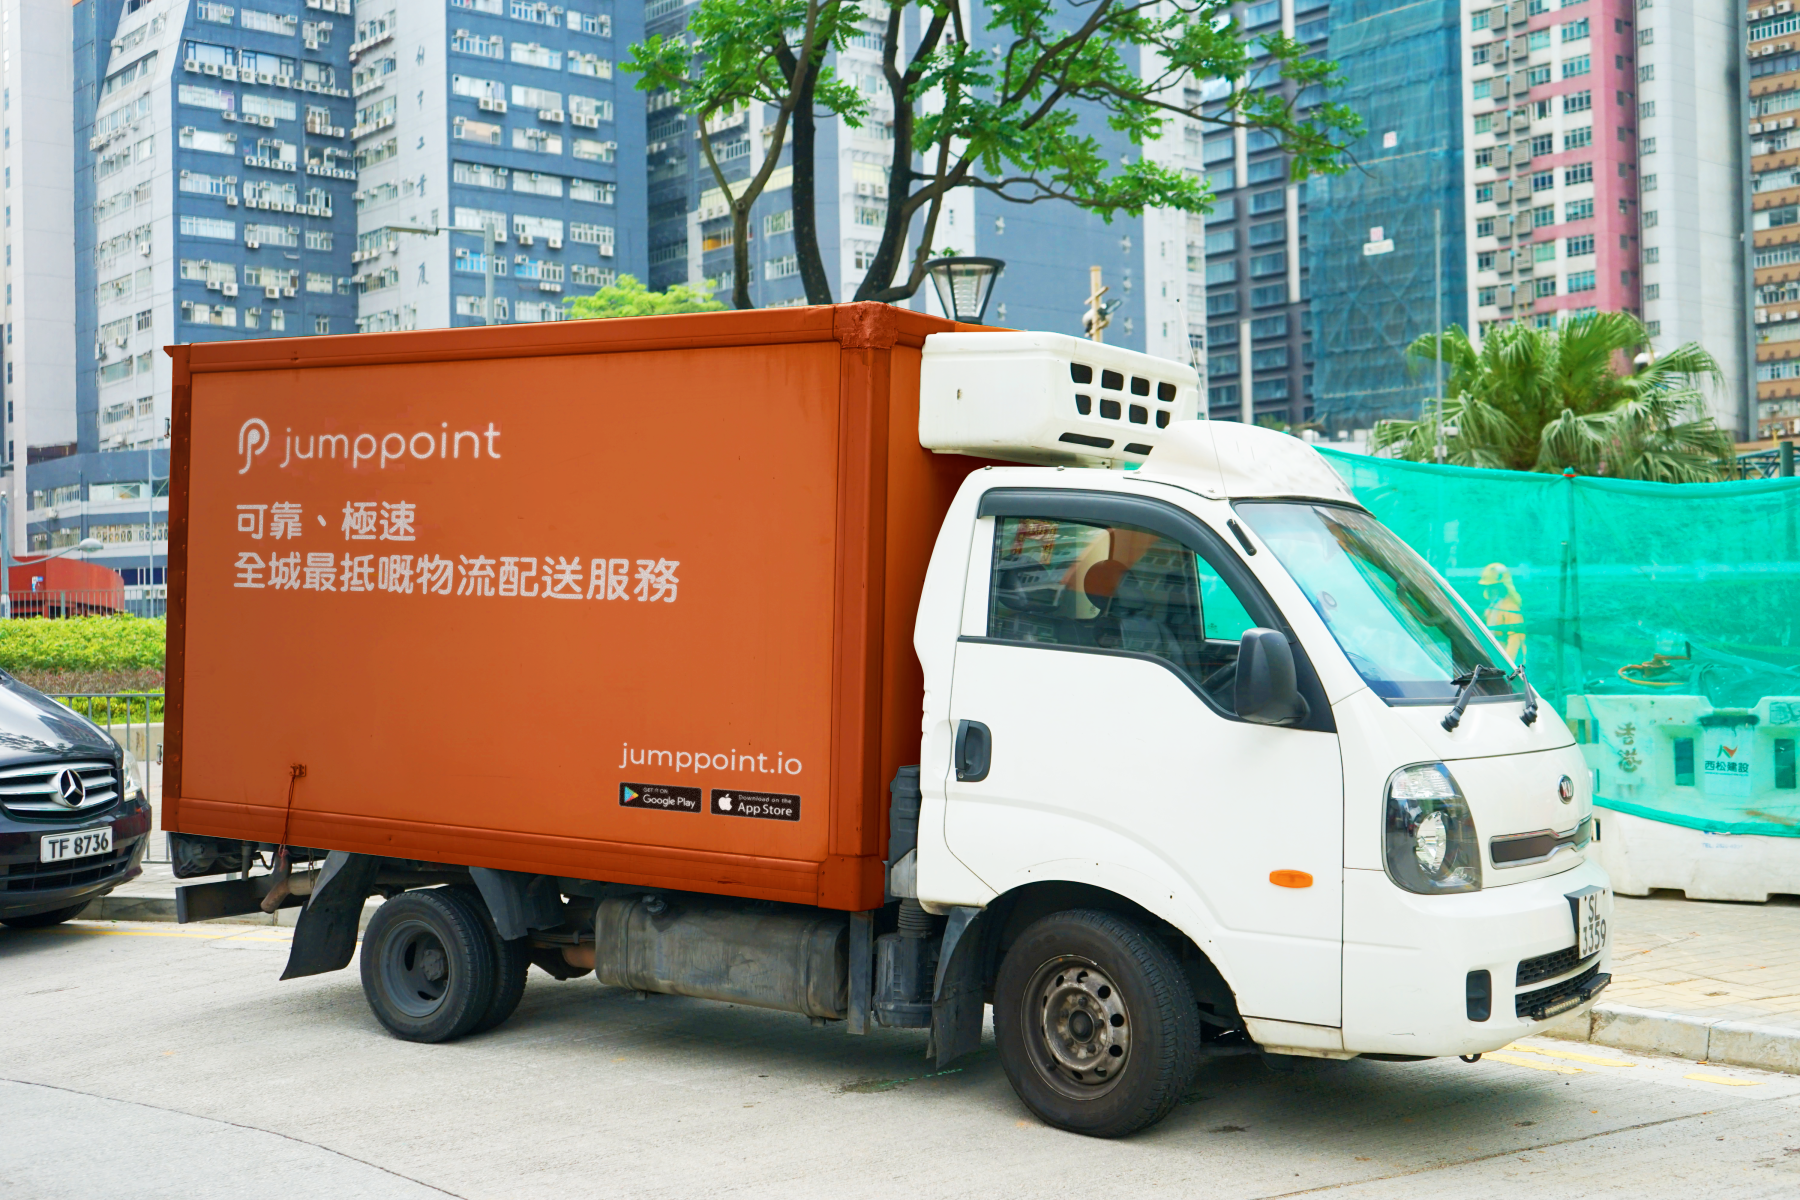 Jumppoint's delivery truck